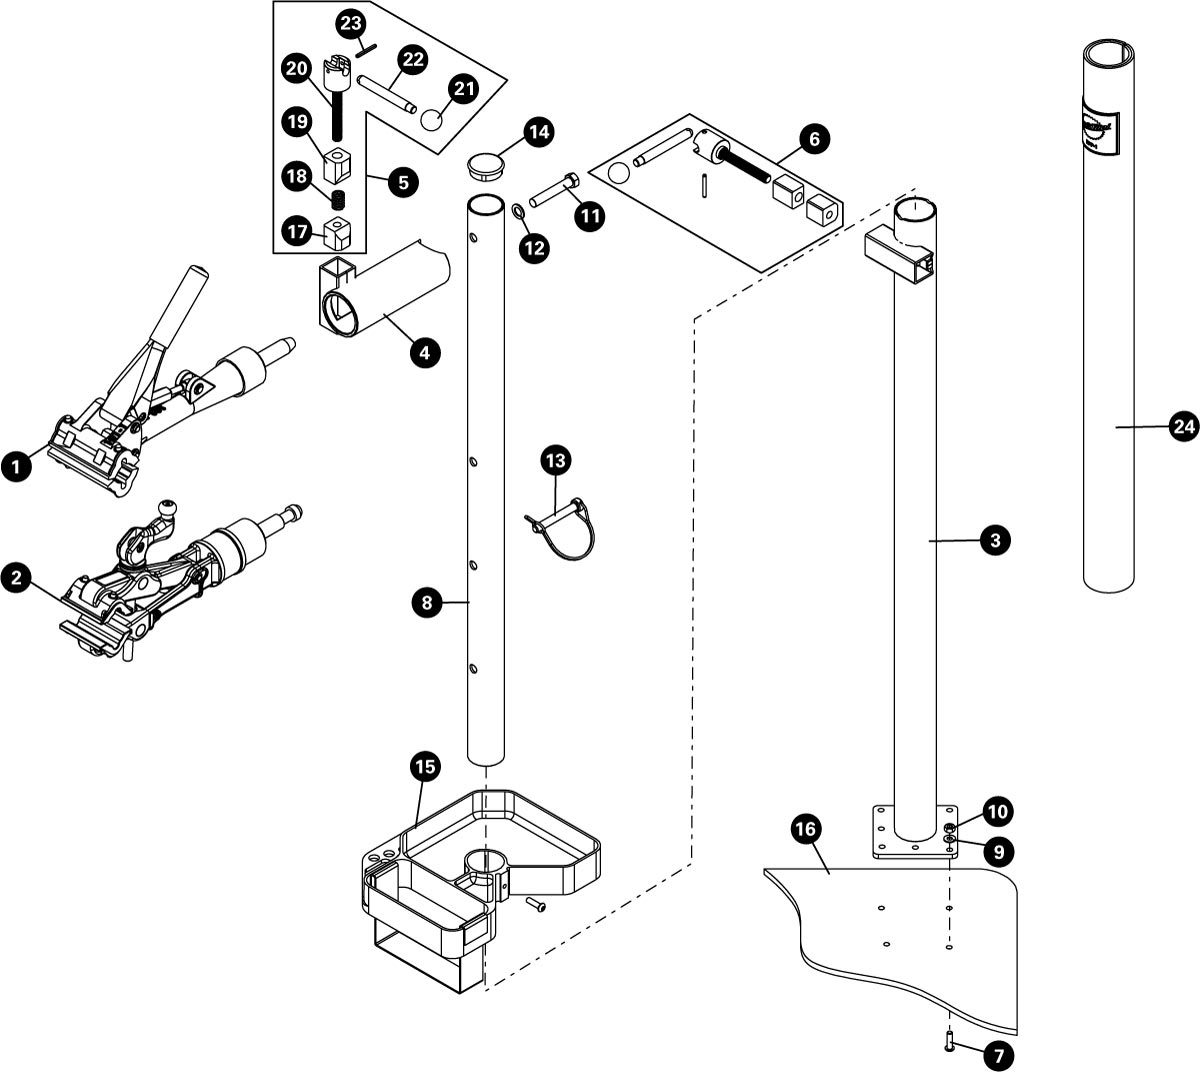 Parts diagram for PRS-3.3-2 Deluxe Single Arm Repair Stand, enlarged